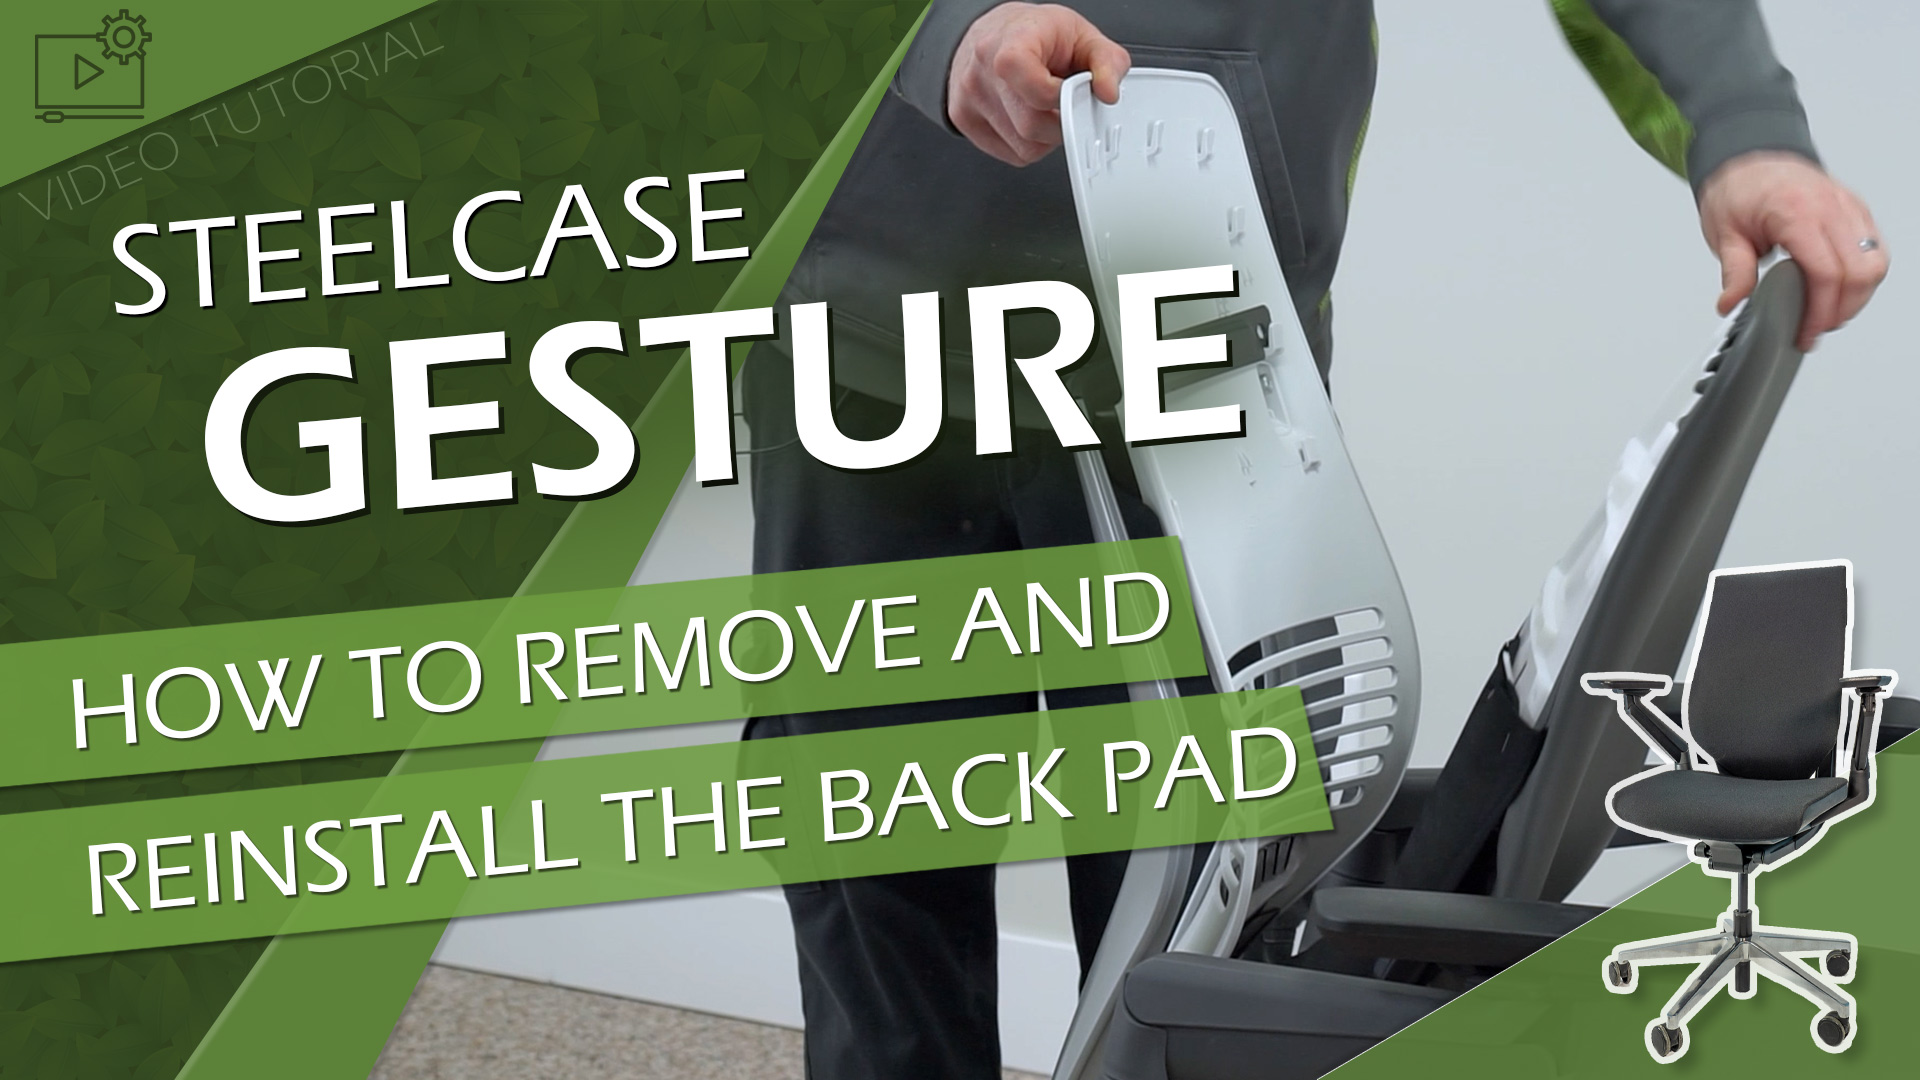 How To Remove And Replace The Back Pad On Your Steelcase Gesture Chair Crandall Office Furniture